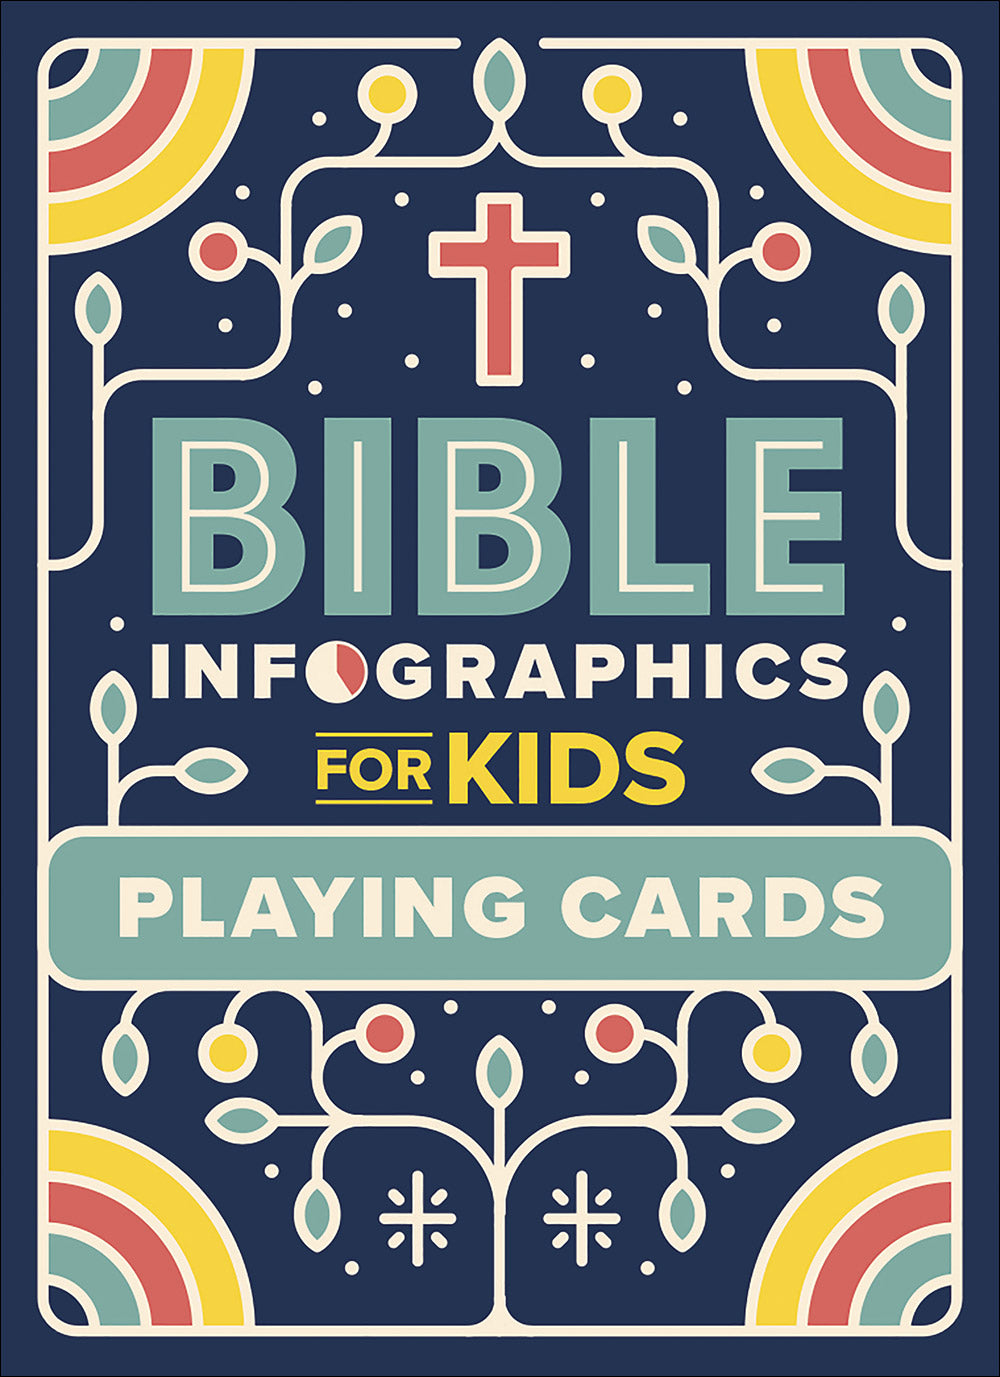 Image of Bible Infographics for Kids Playing Cards other